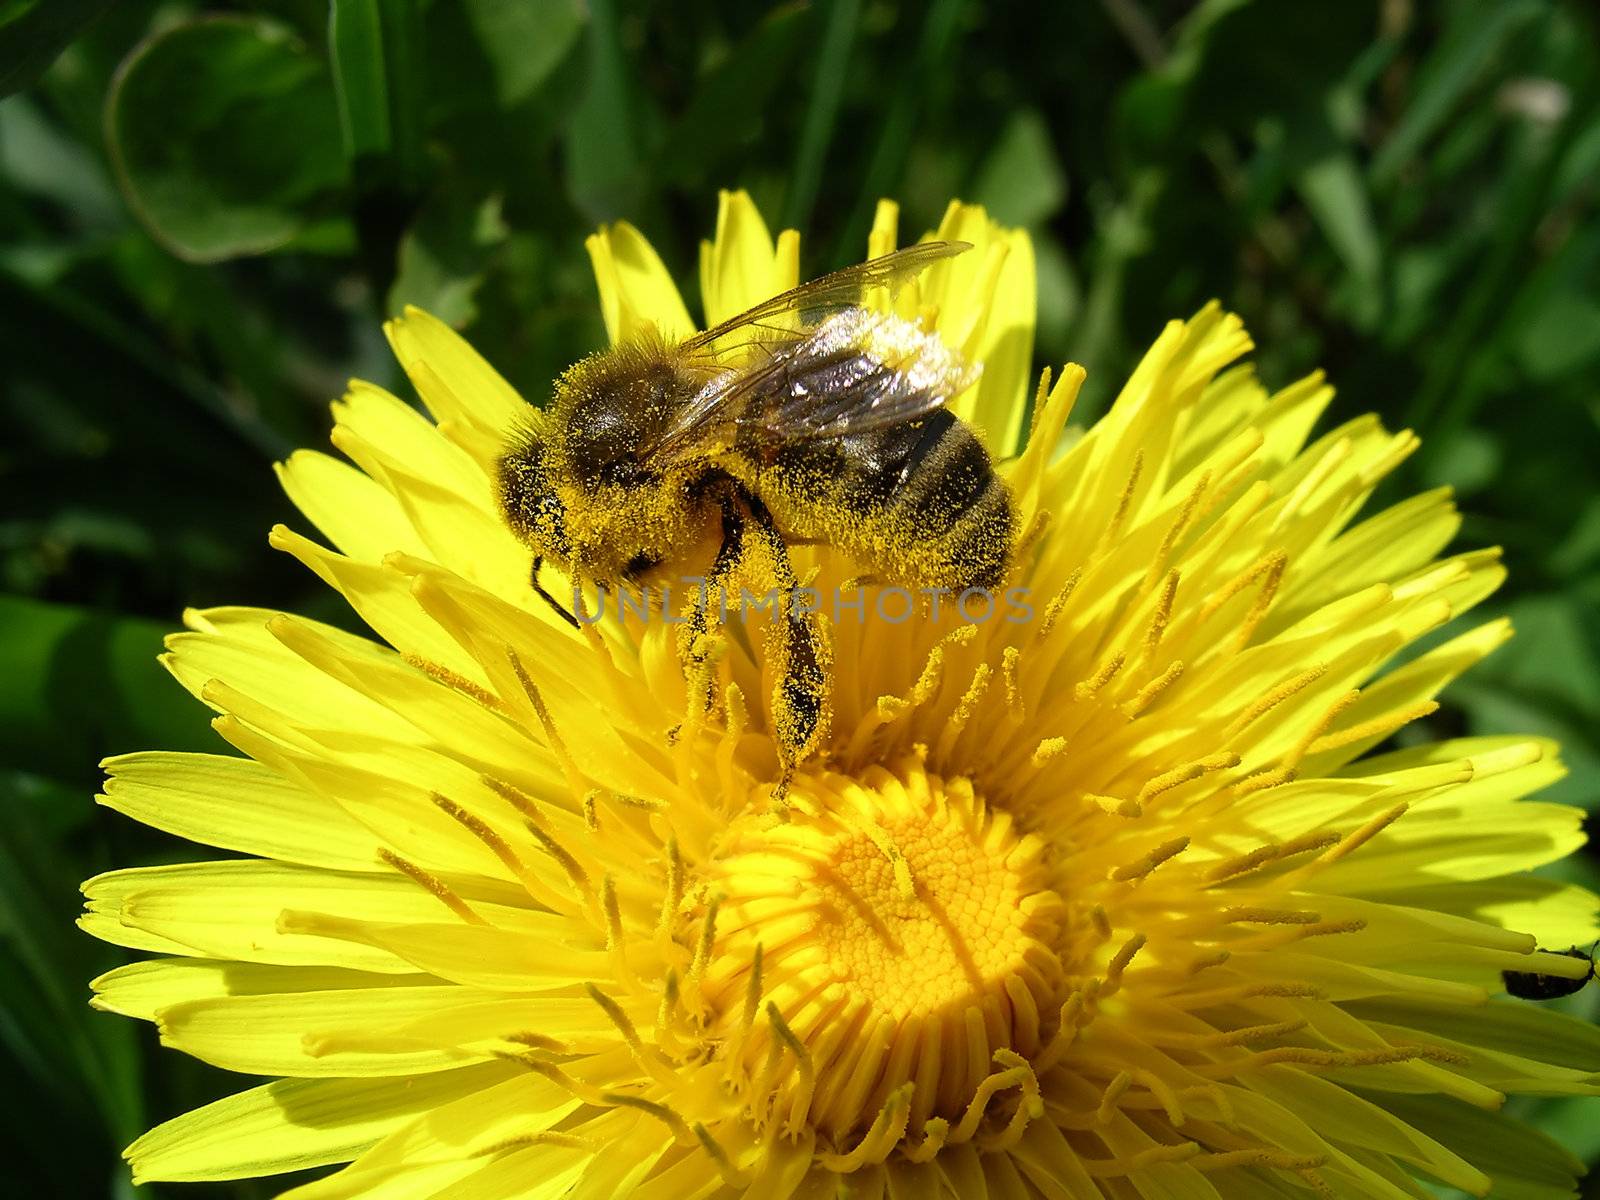 Close view of a honey bee on a dandelion